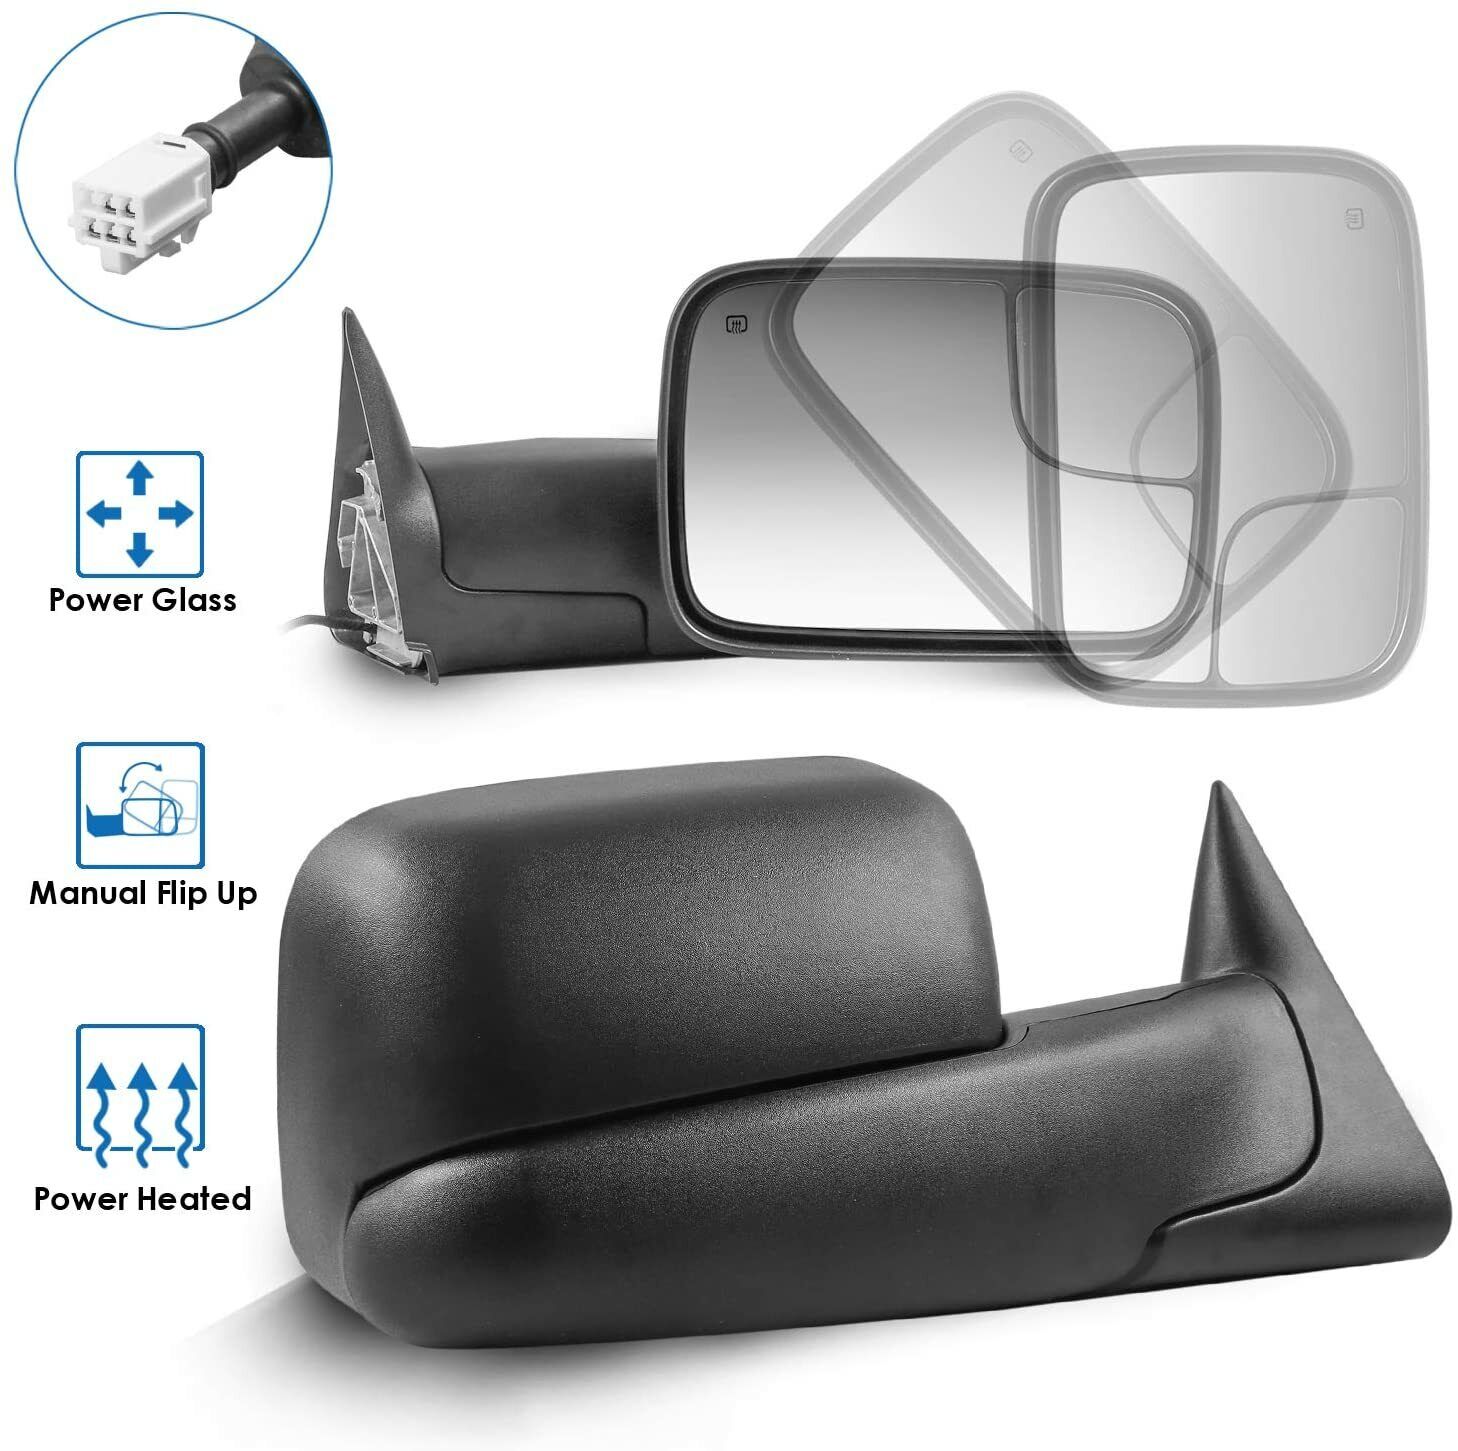 Driver+Passenger Power Heated Tow Mirrors For 98-01 Dodge Ram 1500/2500/3500